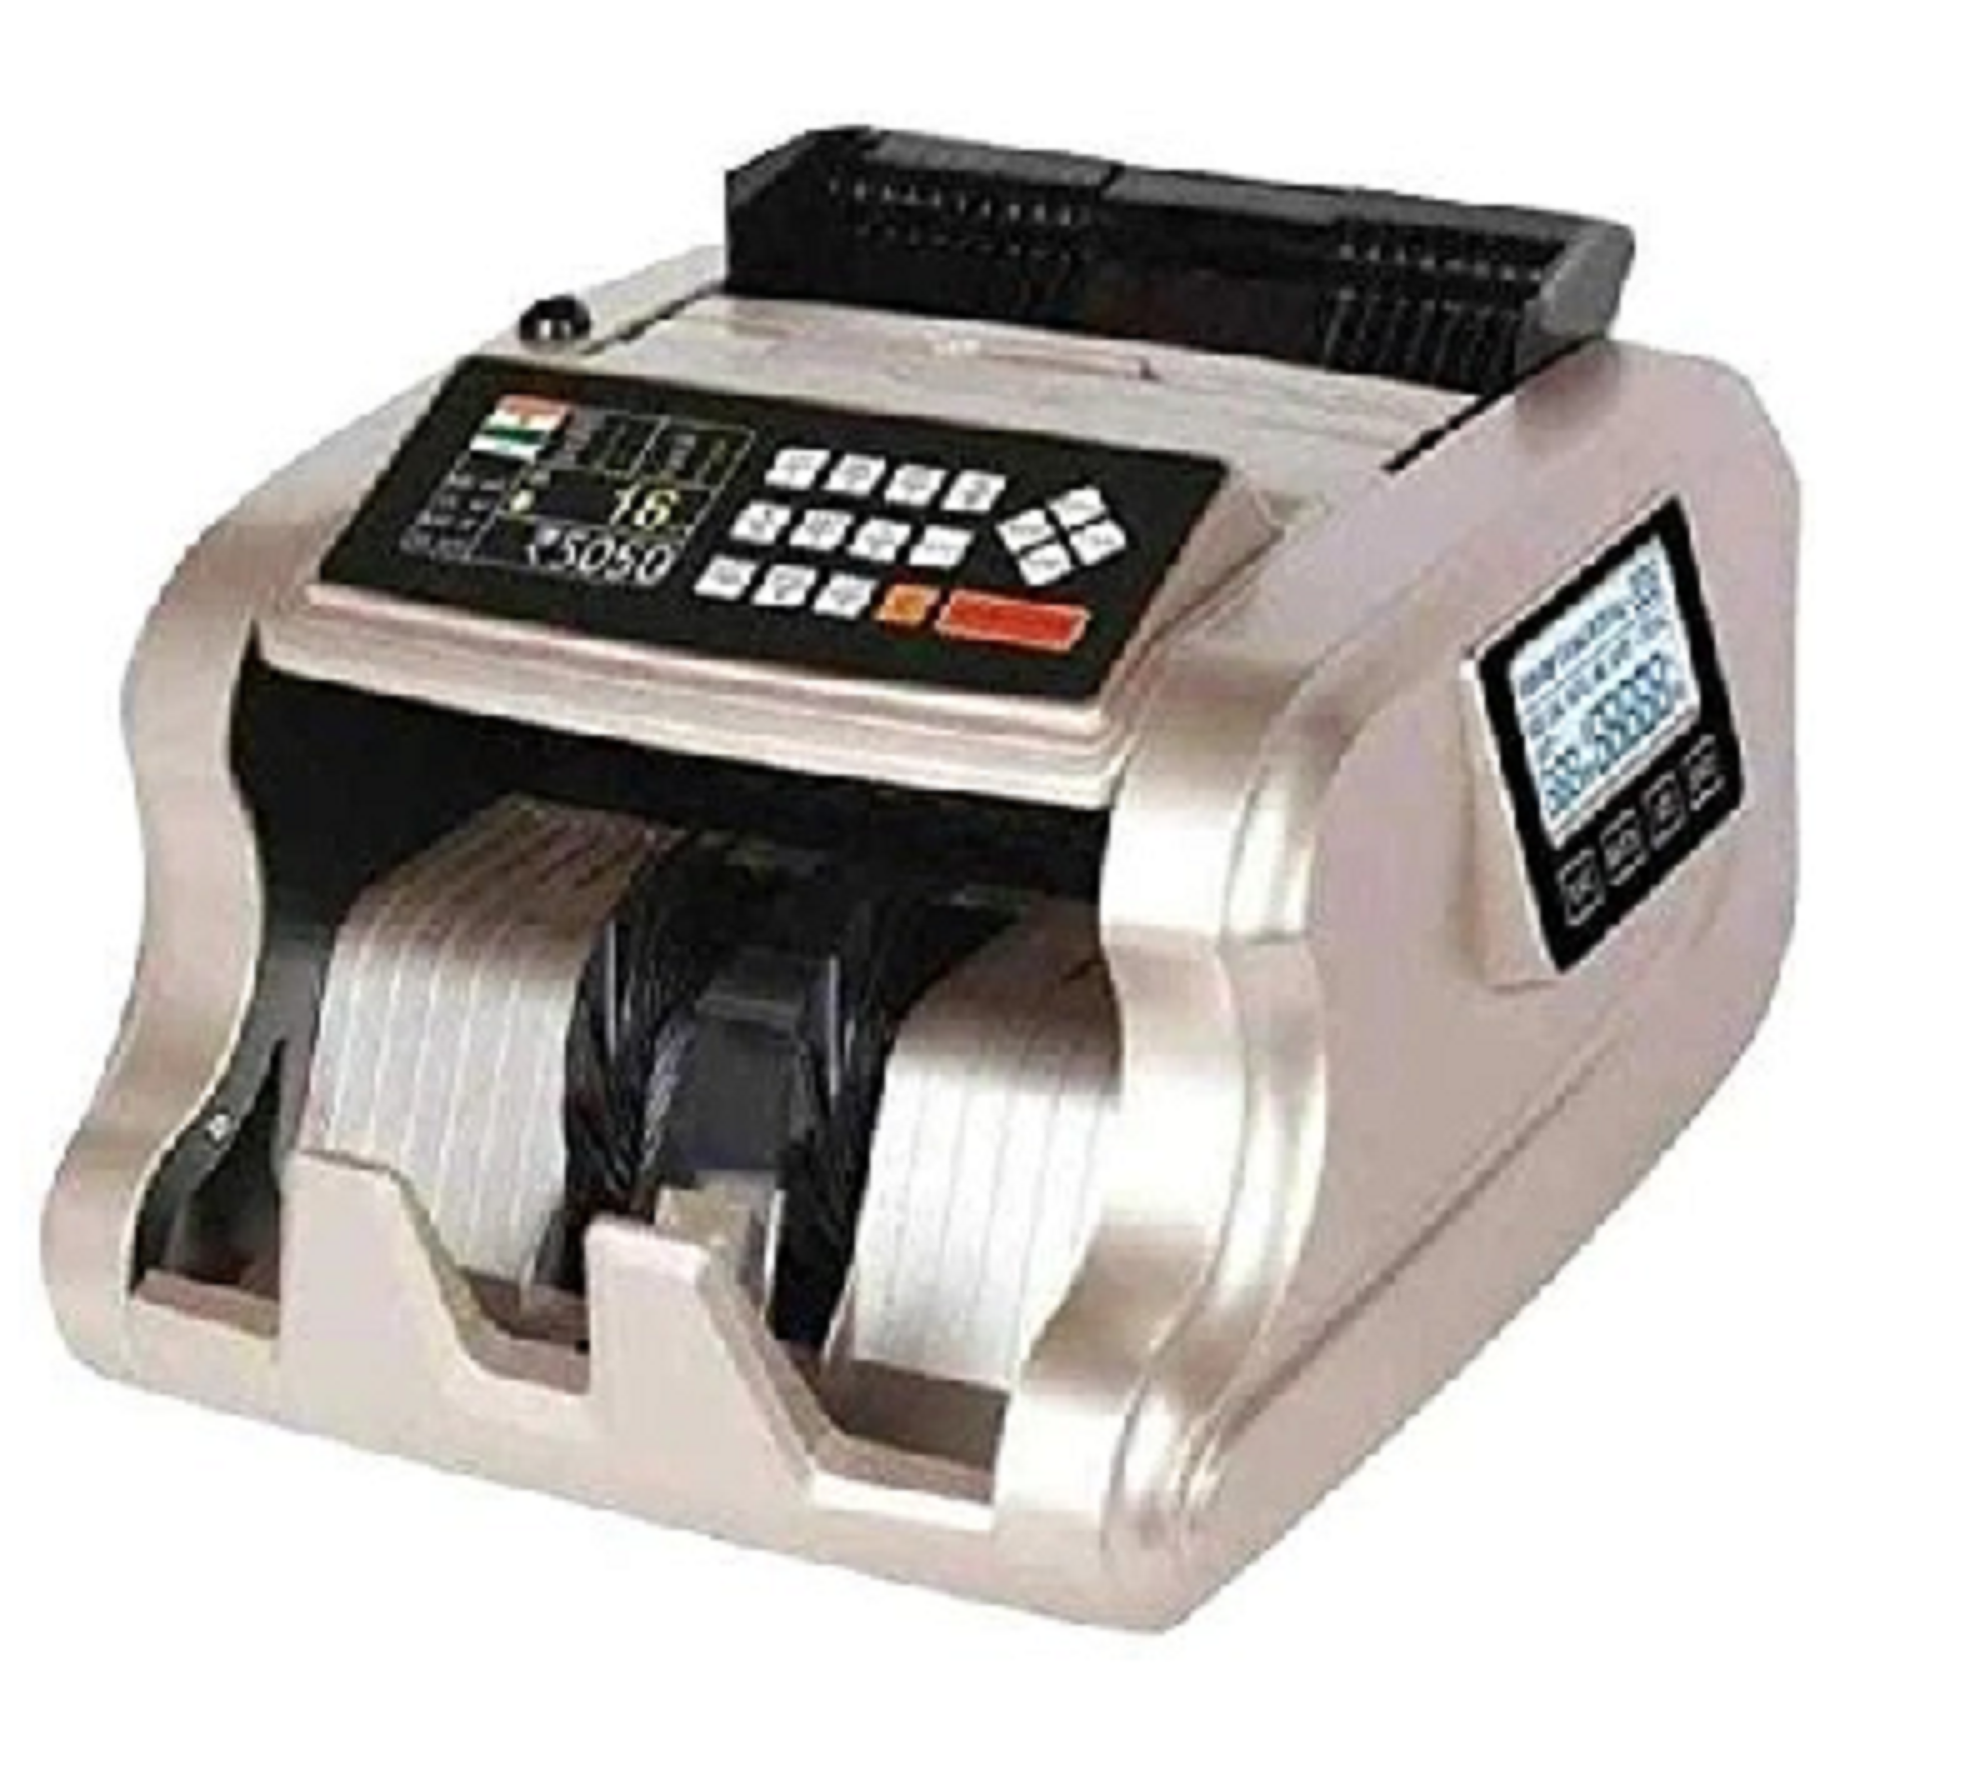 Navkar System Mix Note Value Counting Machine